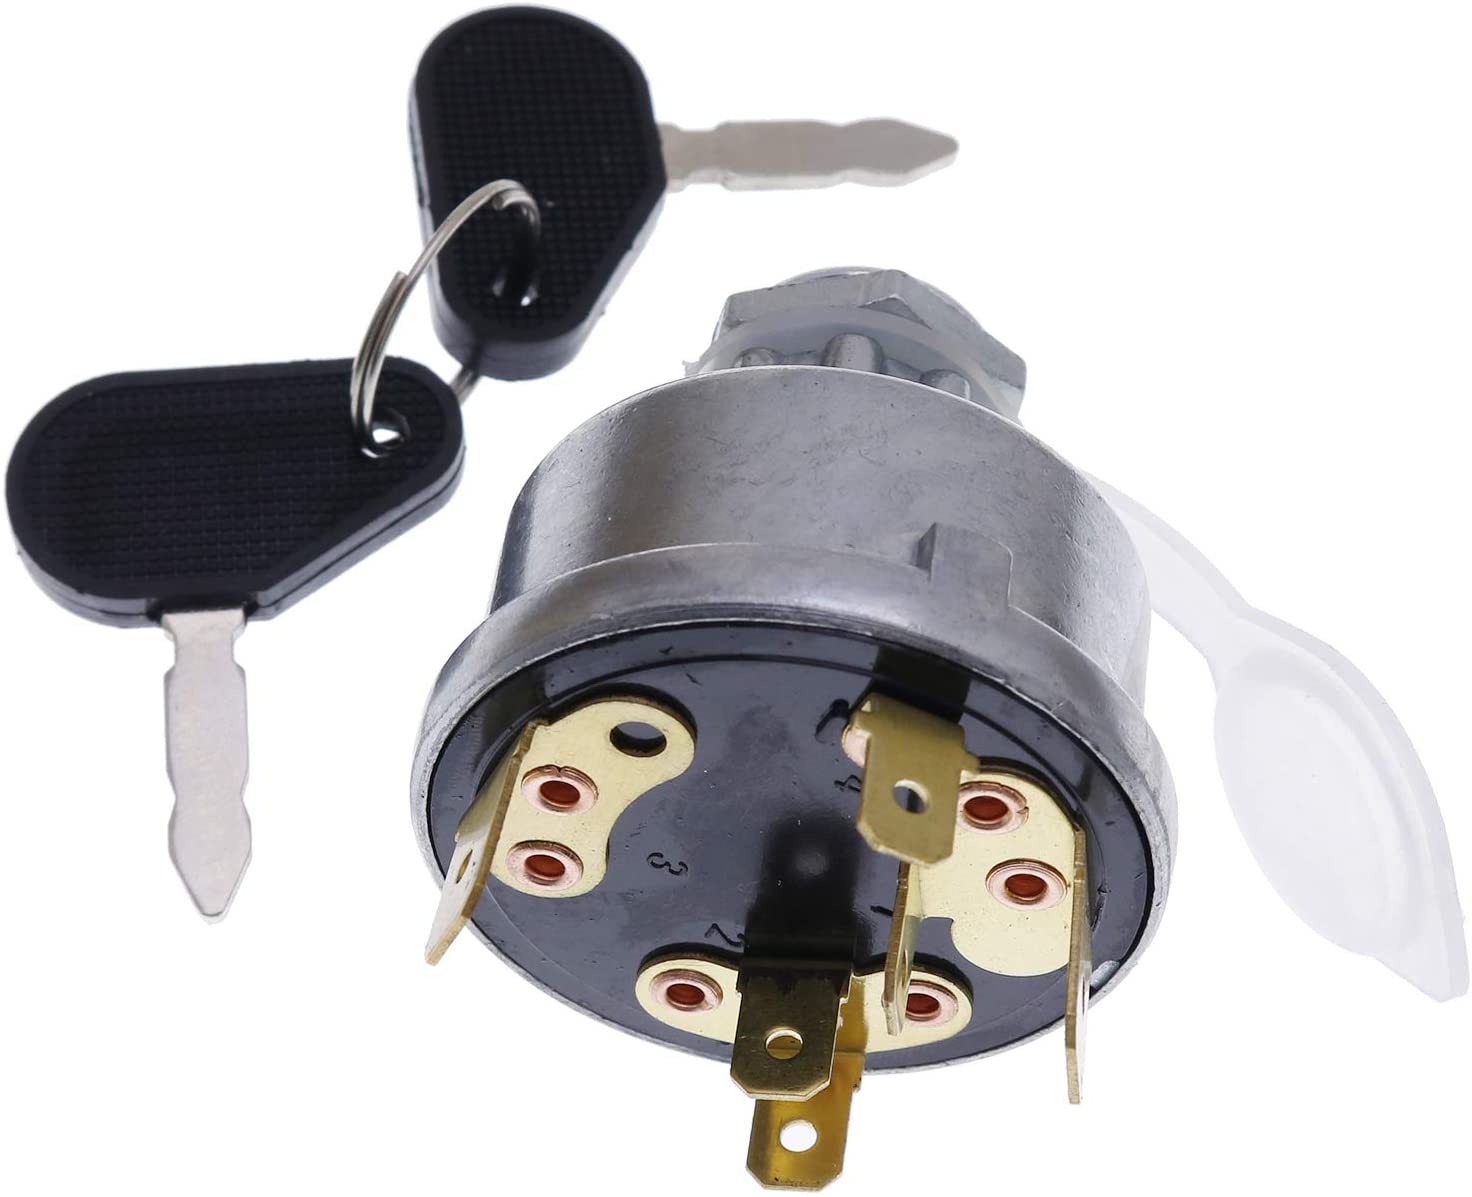 Ignition Starter Switch 128SA 35670 with Water-Proof Cover and Keys Fit for Massey Ferguson 30 275 JCB 35670 Lucas Tractor - KUDUPARTS